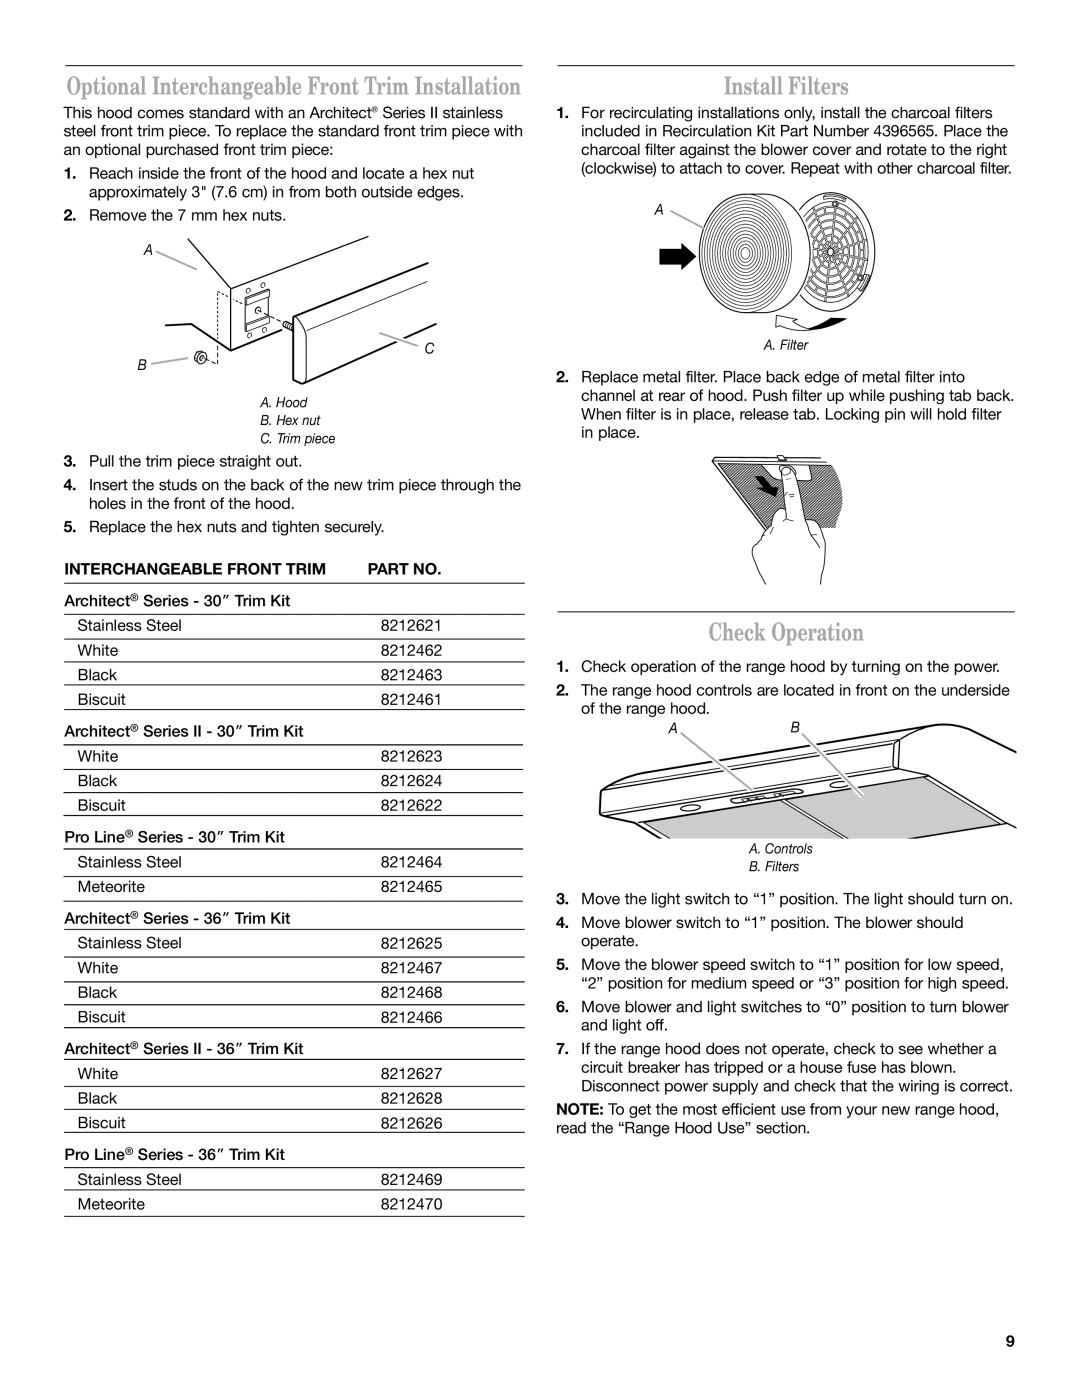 KitchenAid Ventilation Hood installation instructions Install Filters, Check Operation, Interchangeable Front Trim 